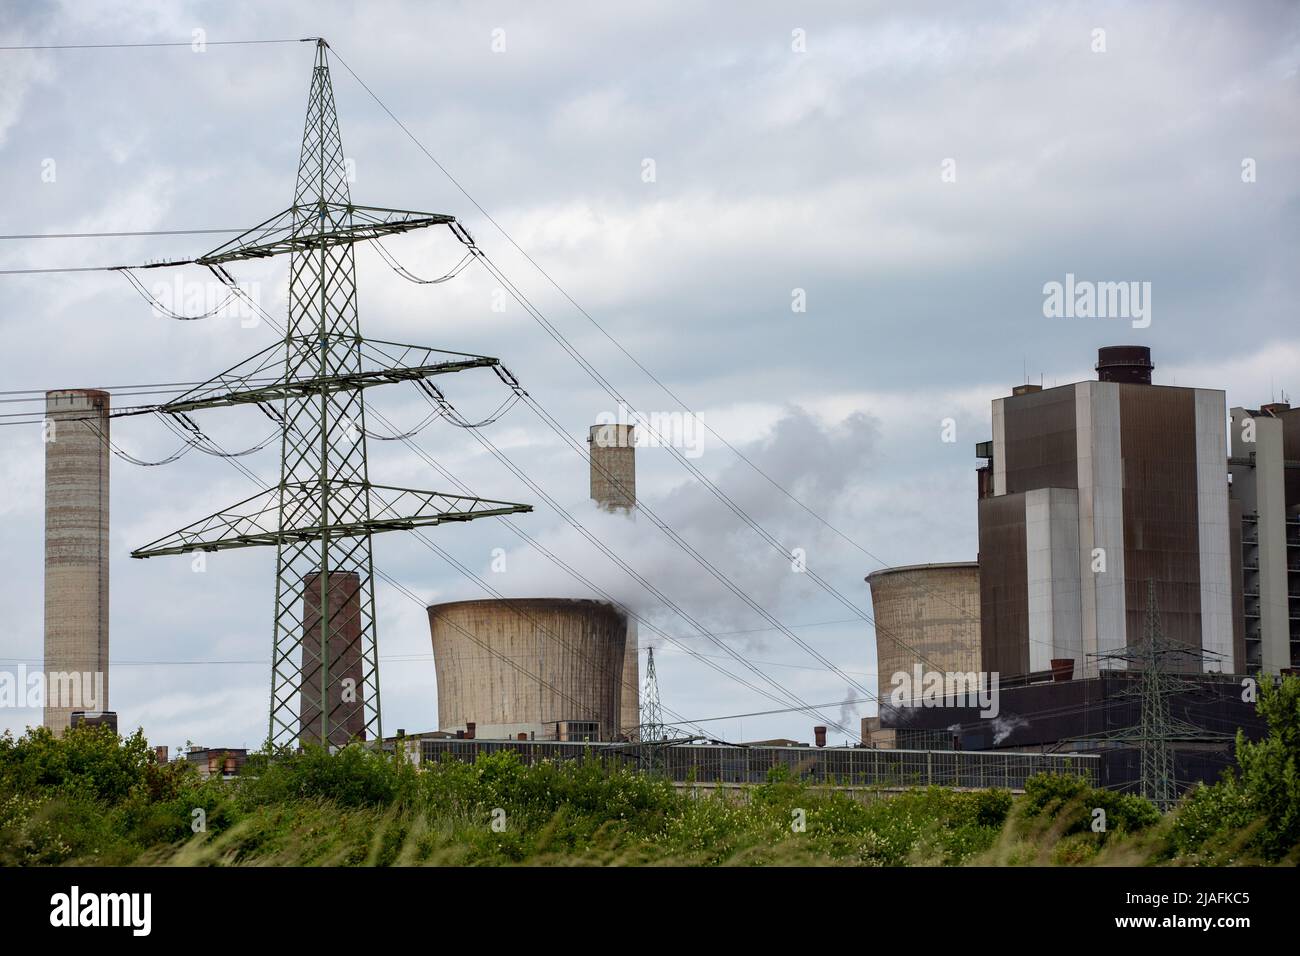 RWE Weisweiler Lignite-fired Power Plant In NRW. Steaming Cooling Tower With A High Voltage Pylon Next To It Stock Photo